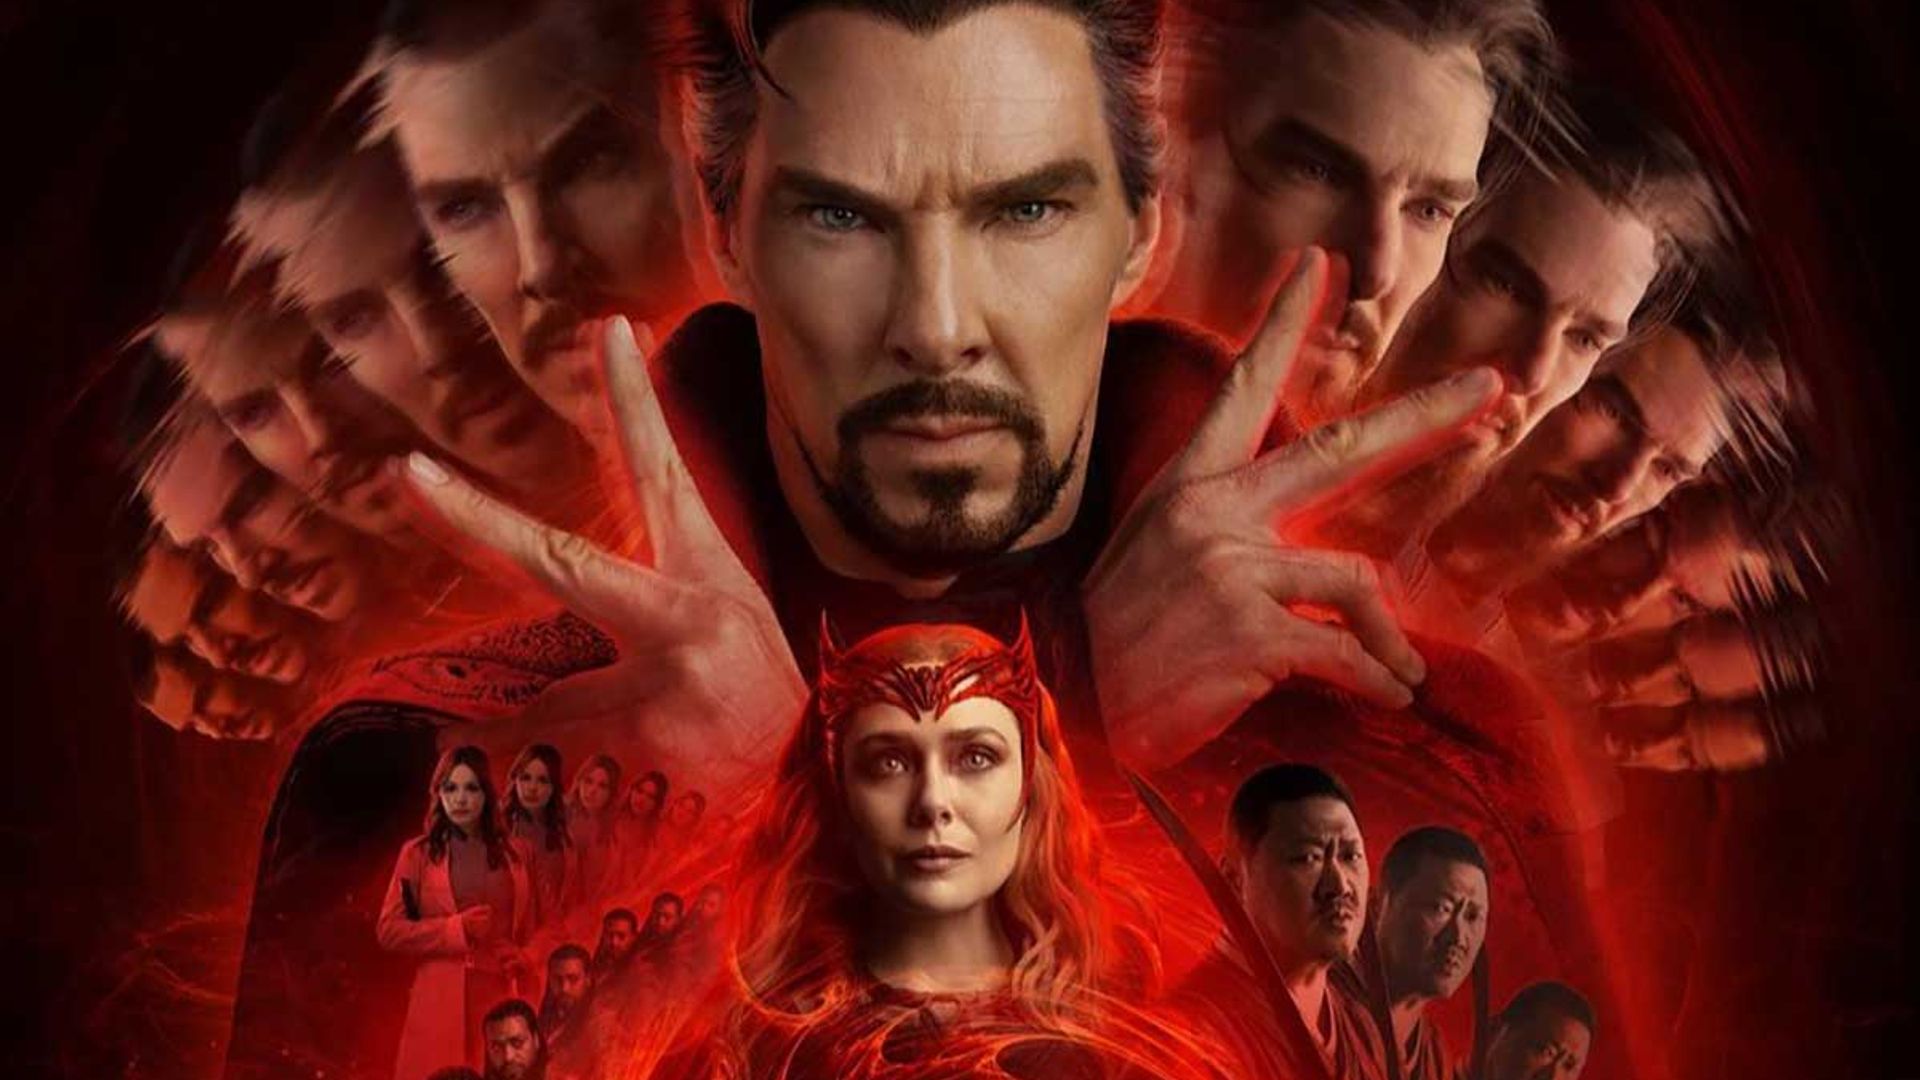 Doctor Strange in the Multiverse of Madness: Vewers have mixed reaction to new Marvel movie